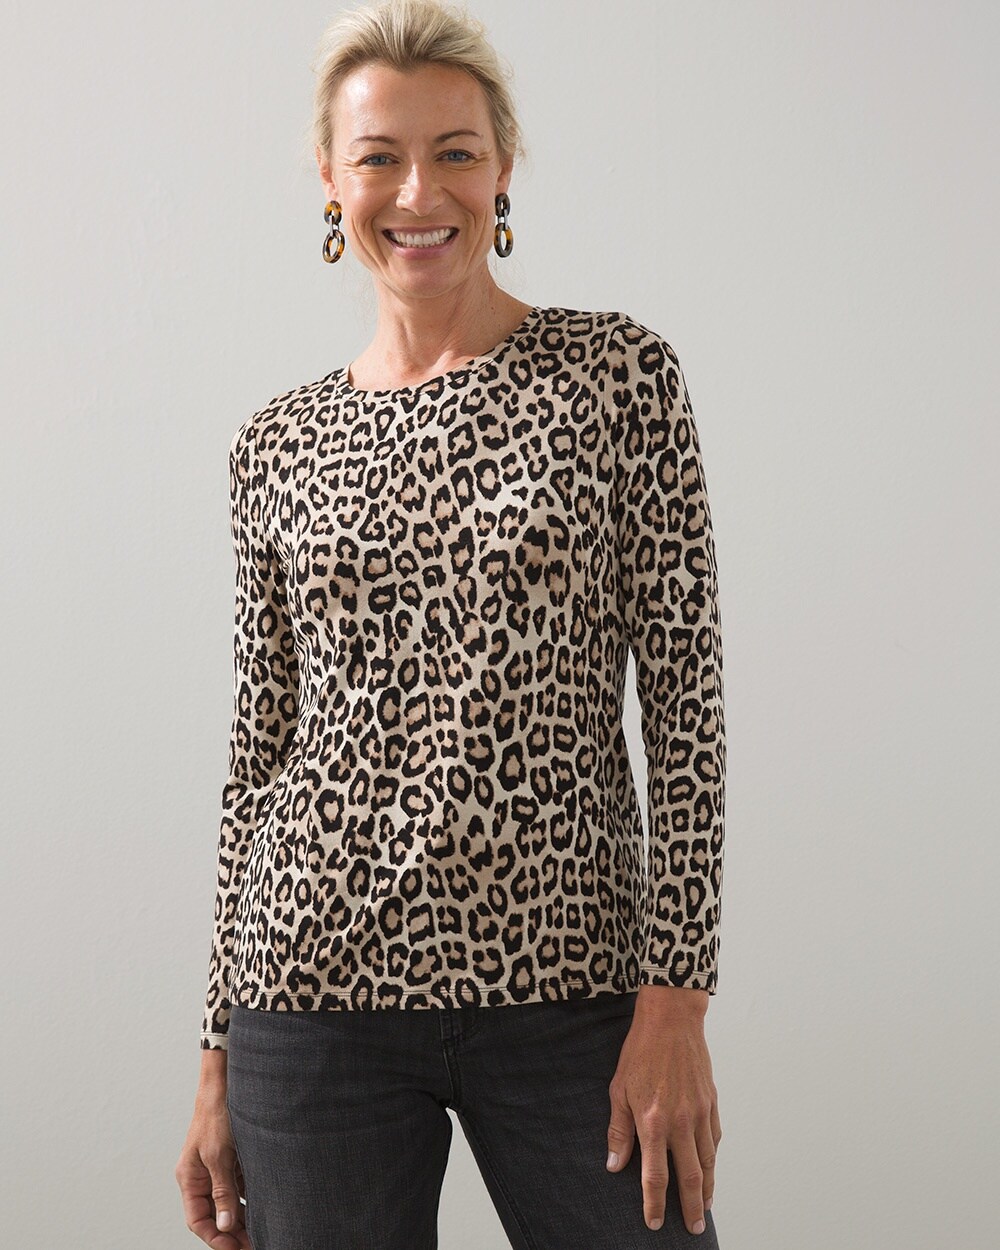 Touch of Cool Animal Print Layering Tee